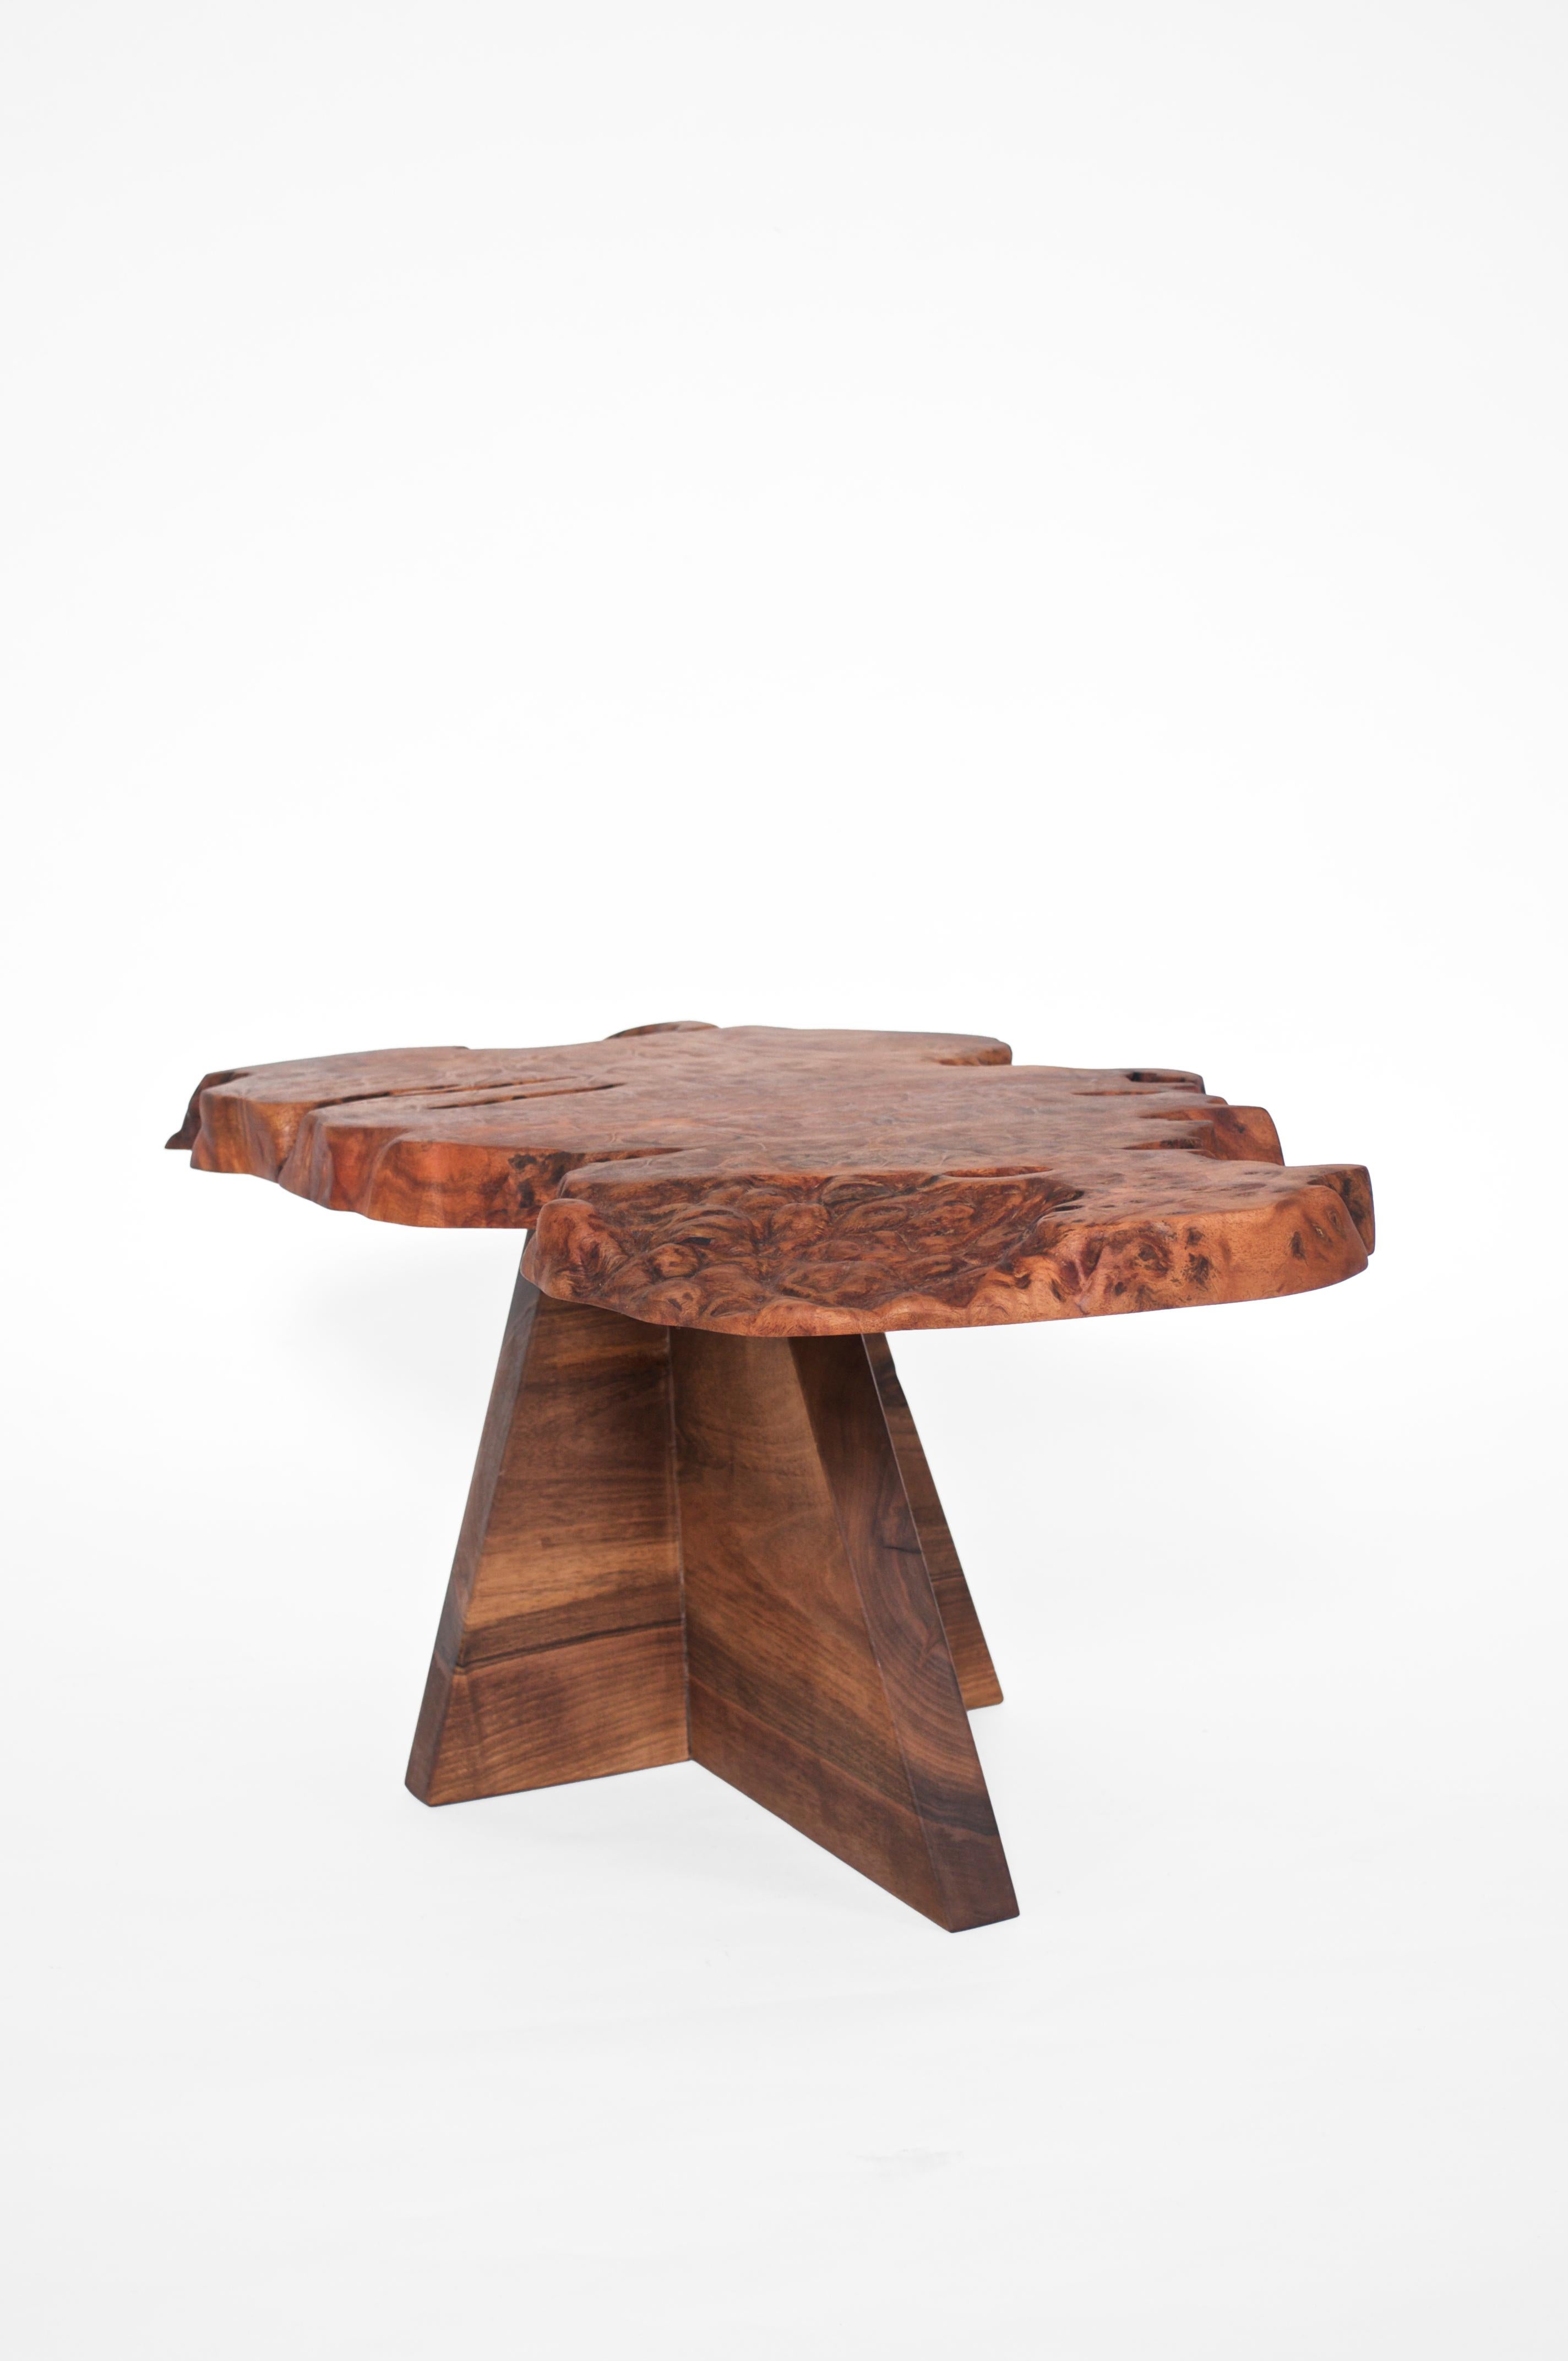 Polished Unique Walnut Signed Table by Jörg Pietschmann